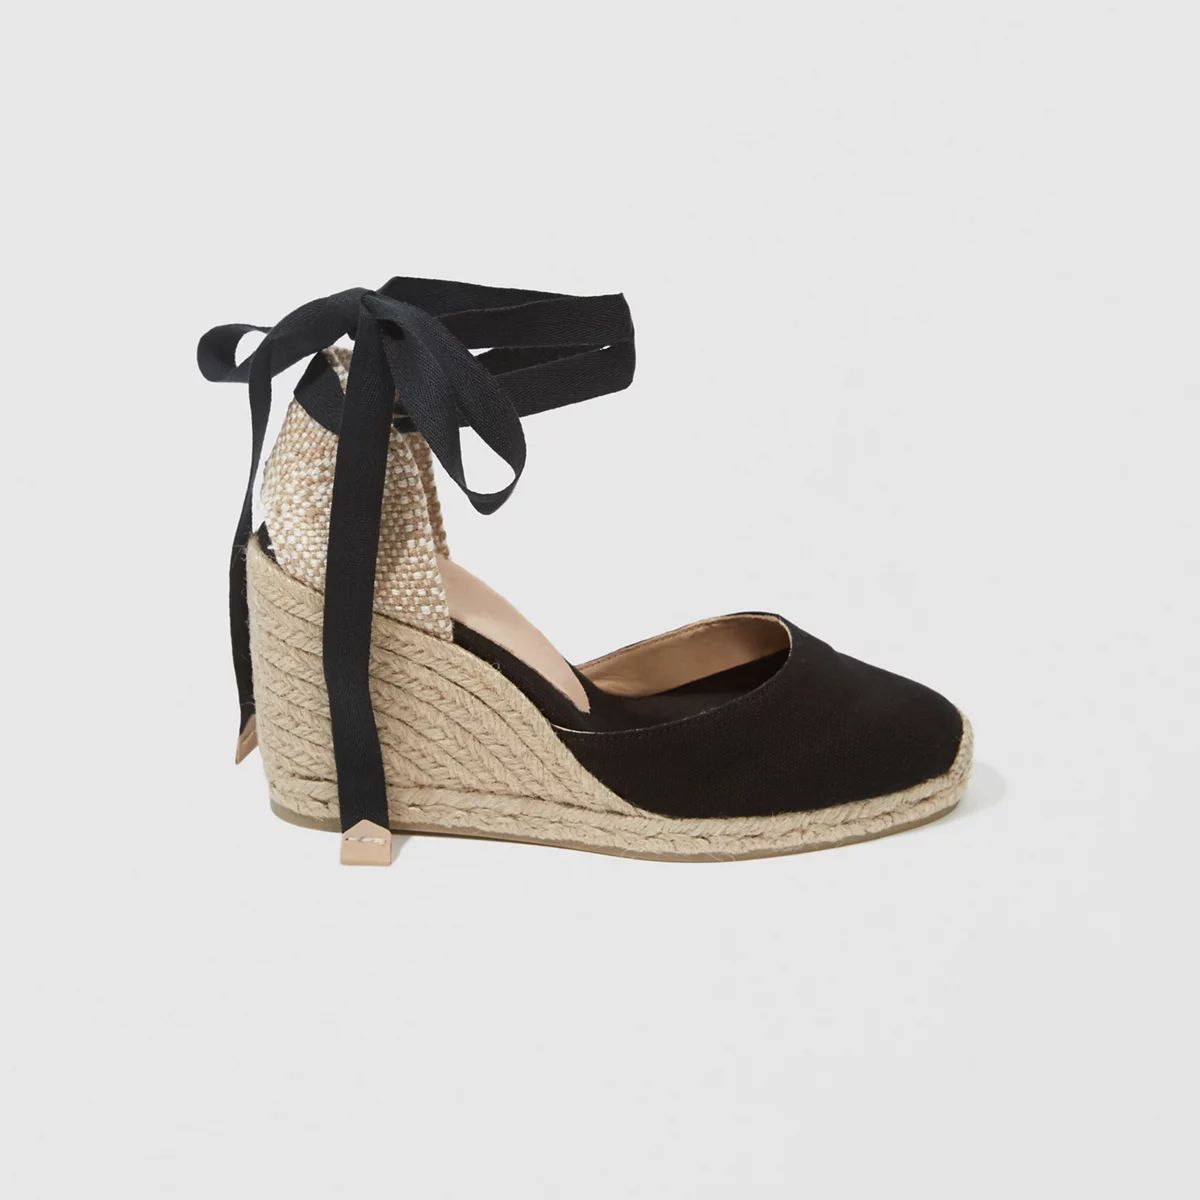 Castaner Carina Wedges | Abercrombie & Fitch US & UK